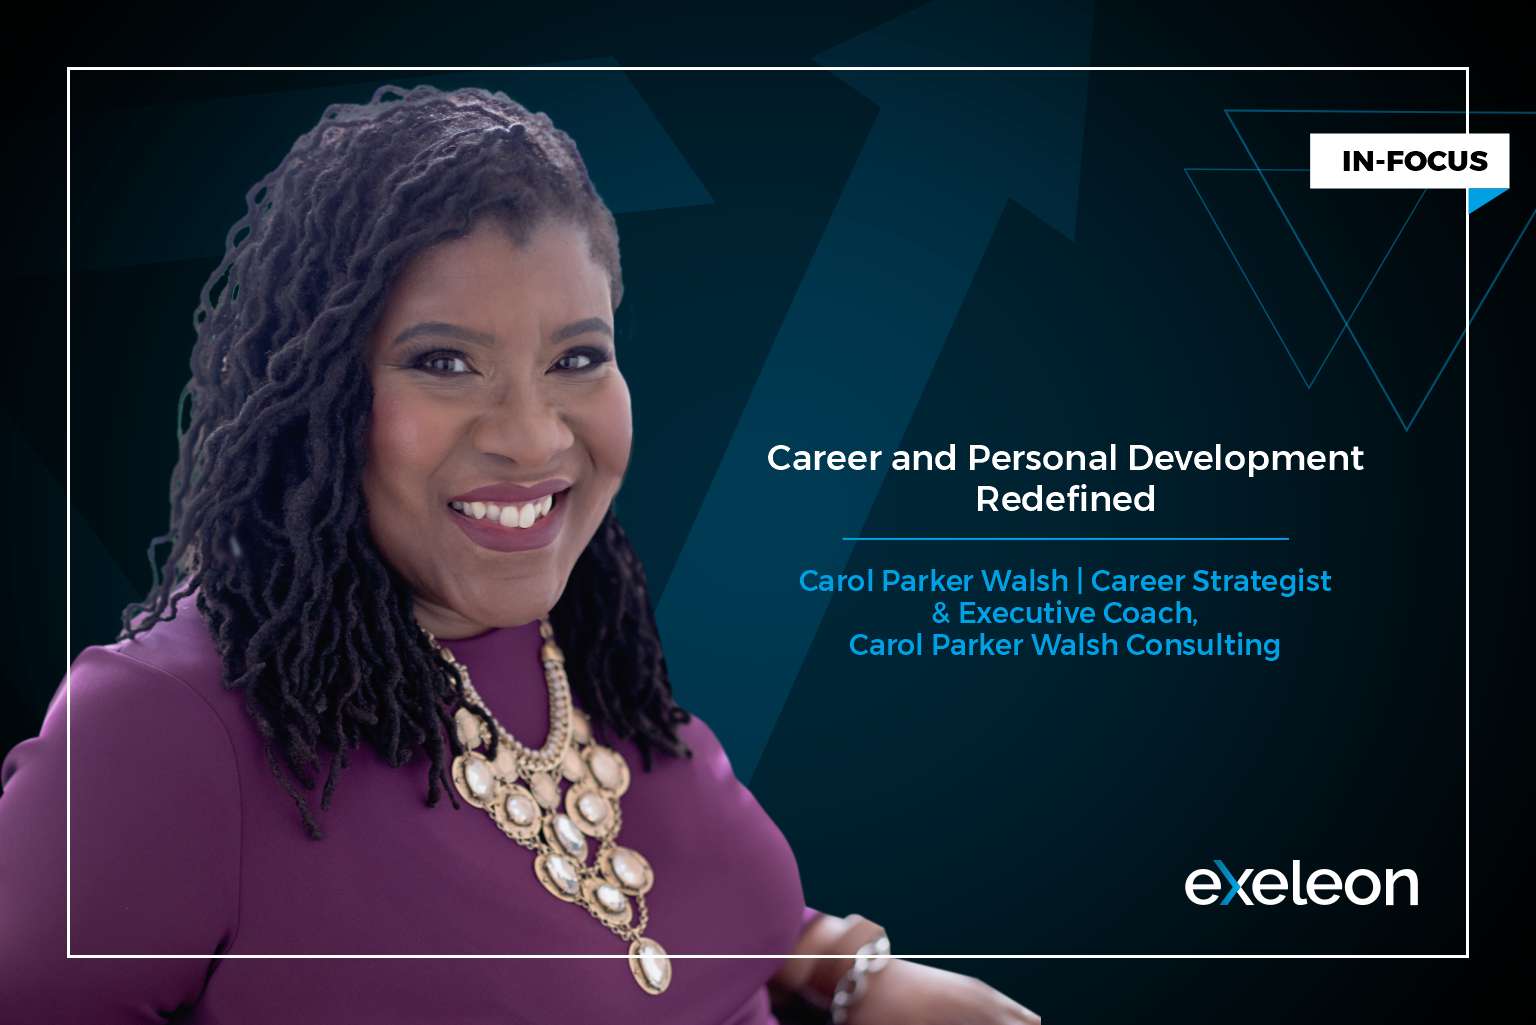 Carol Parker Walsh Career And Personal Development Redefined